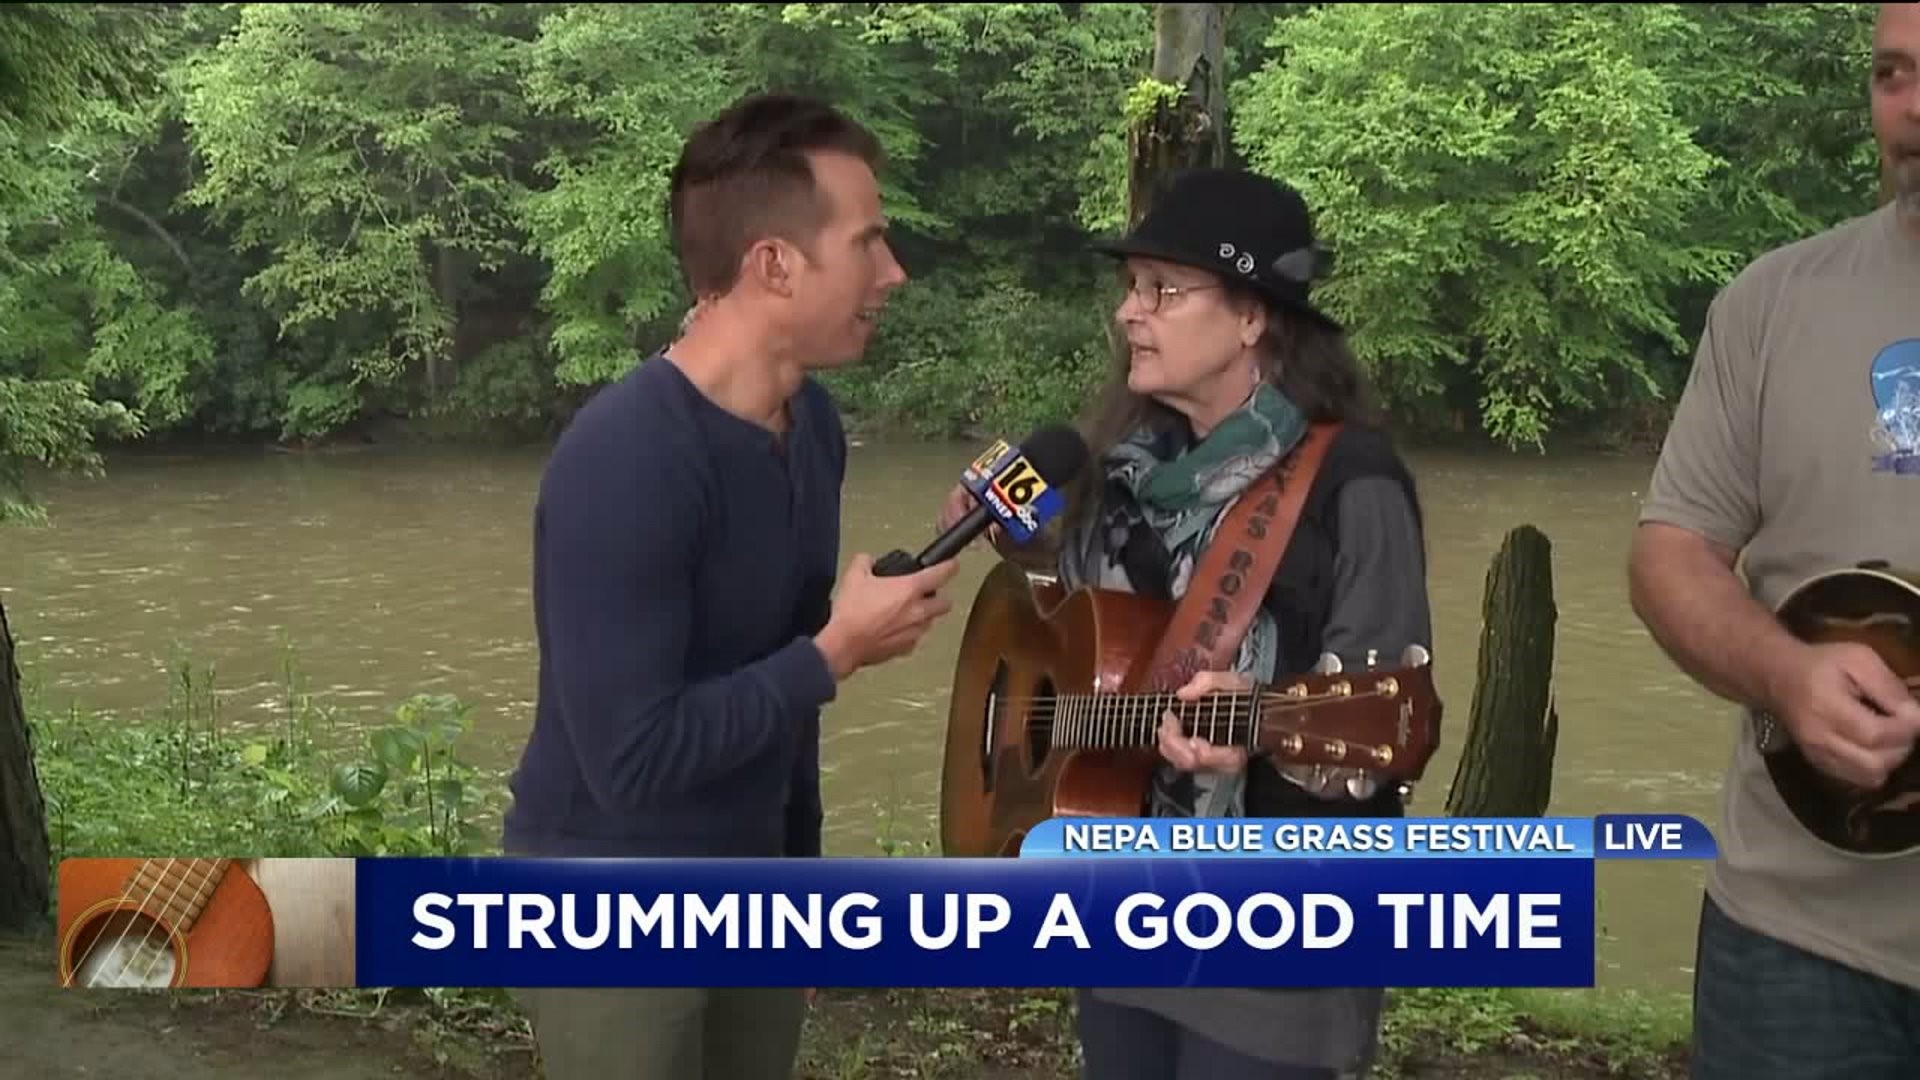 Ryan Tries Yodeling with the Folks from the NEPA Bluegrass Festival